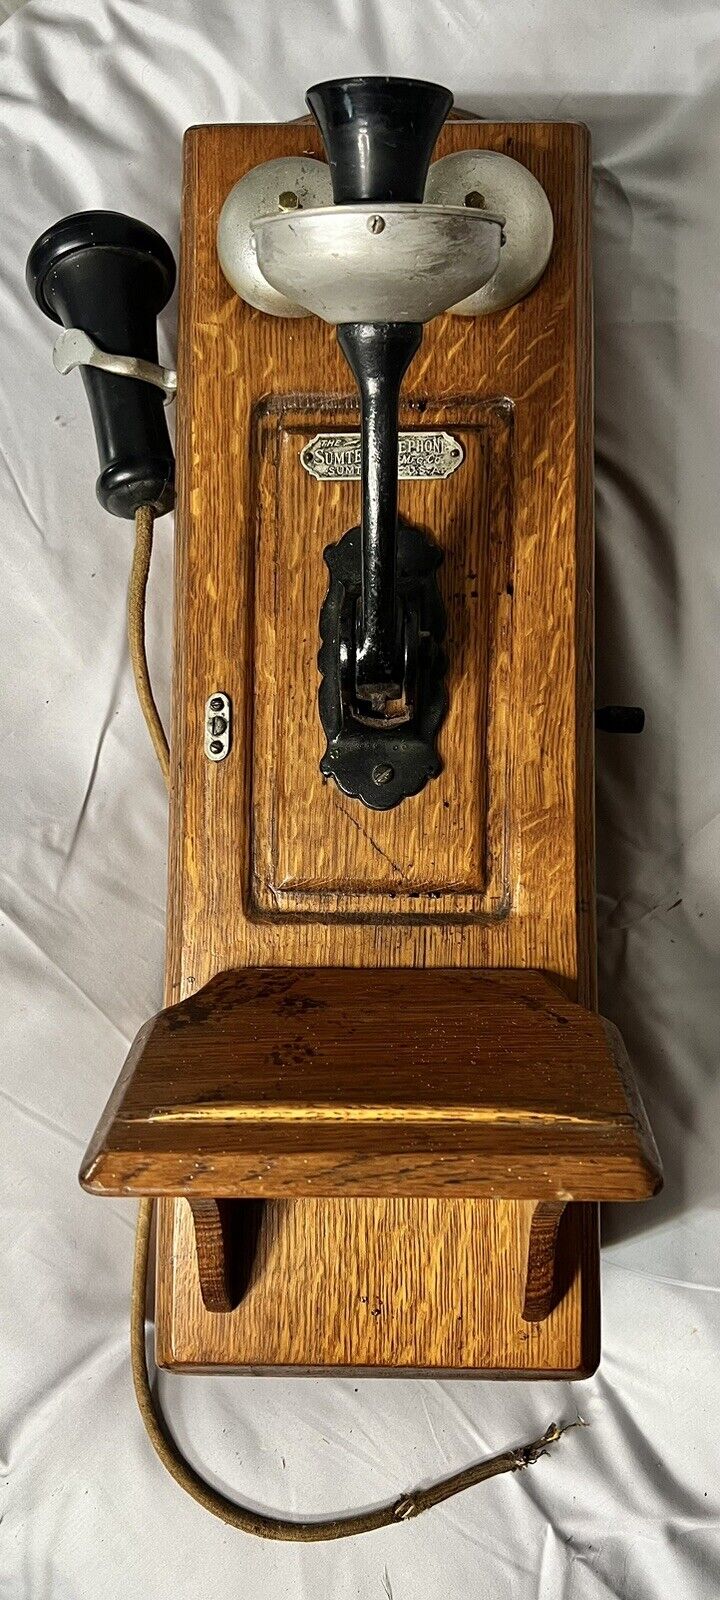 The Sumter Telephone Antique Hand Crank Wall Telephone